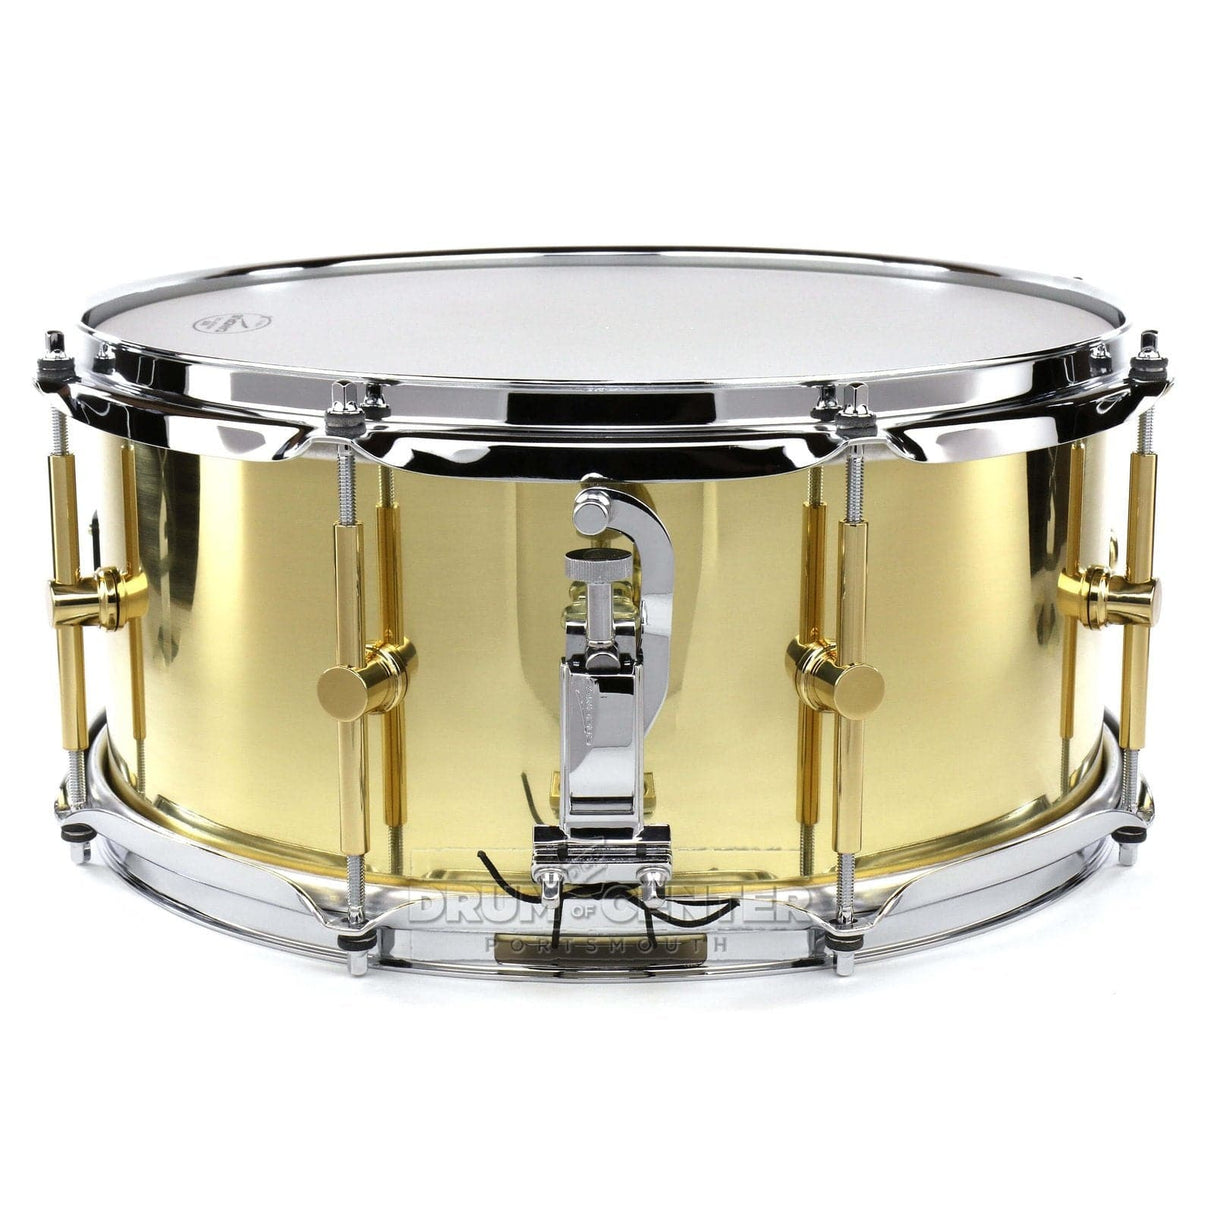 Canopus 'The Brass' Snare Drum 14x6.5 w/ Flanged Hoops